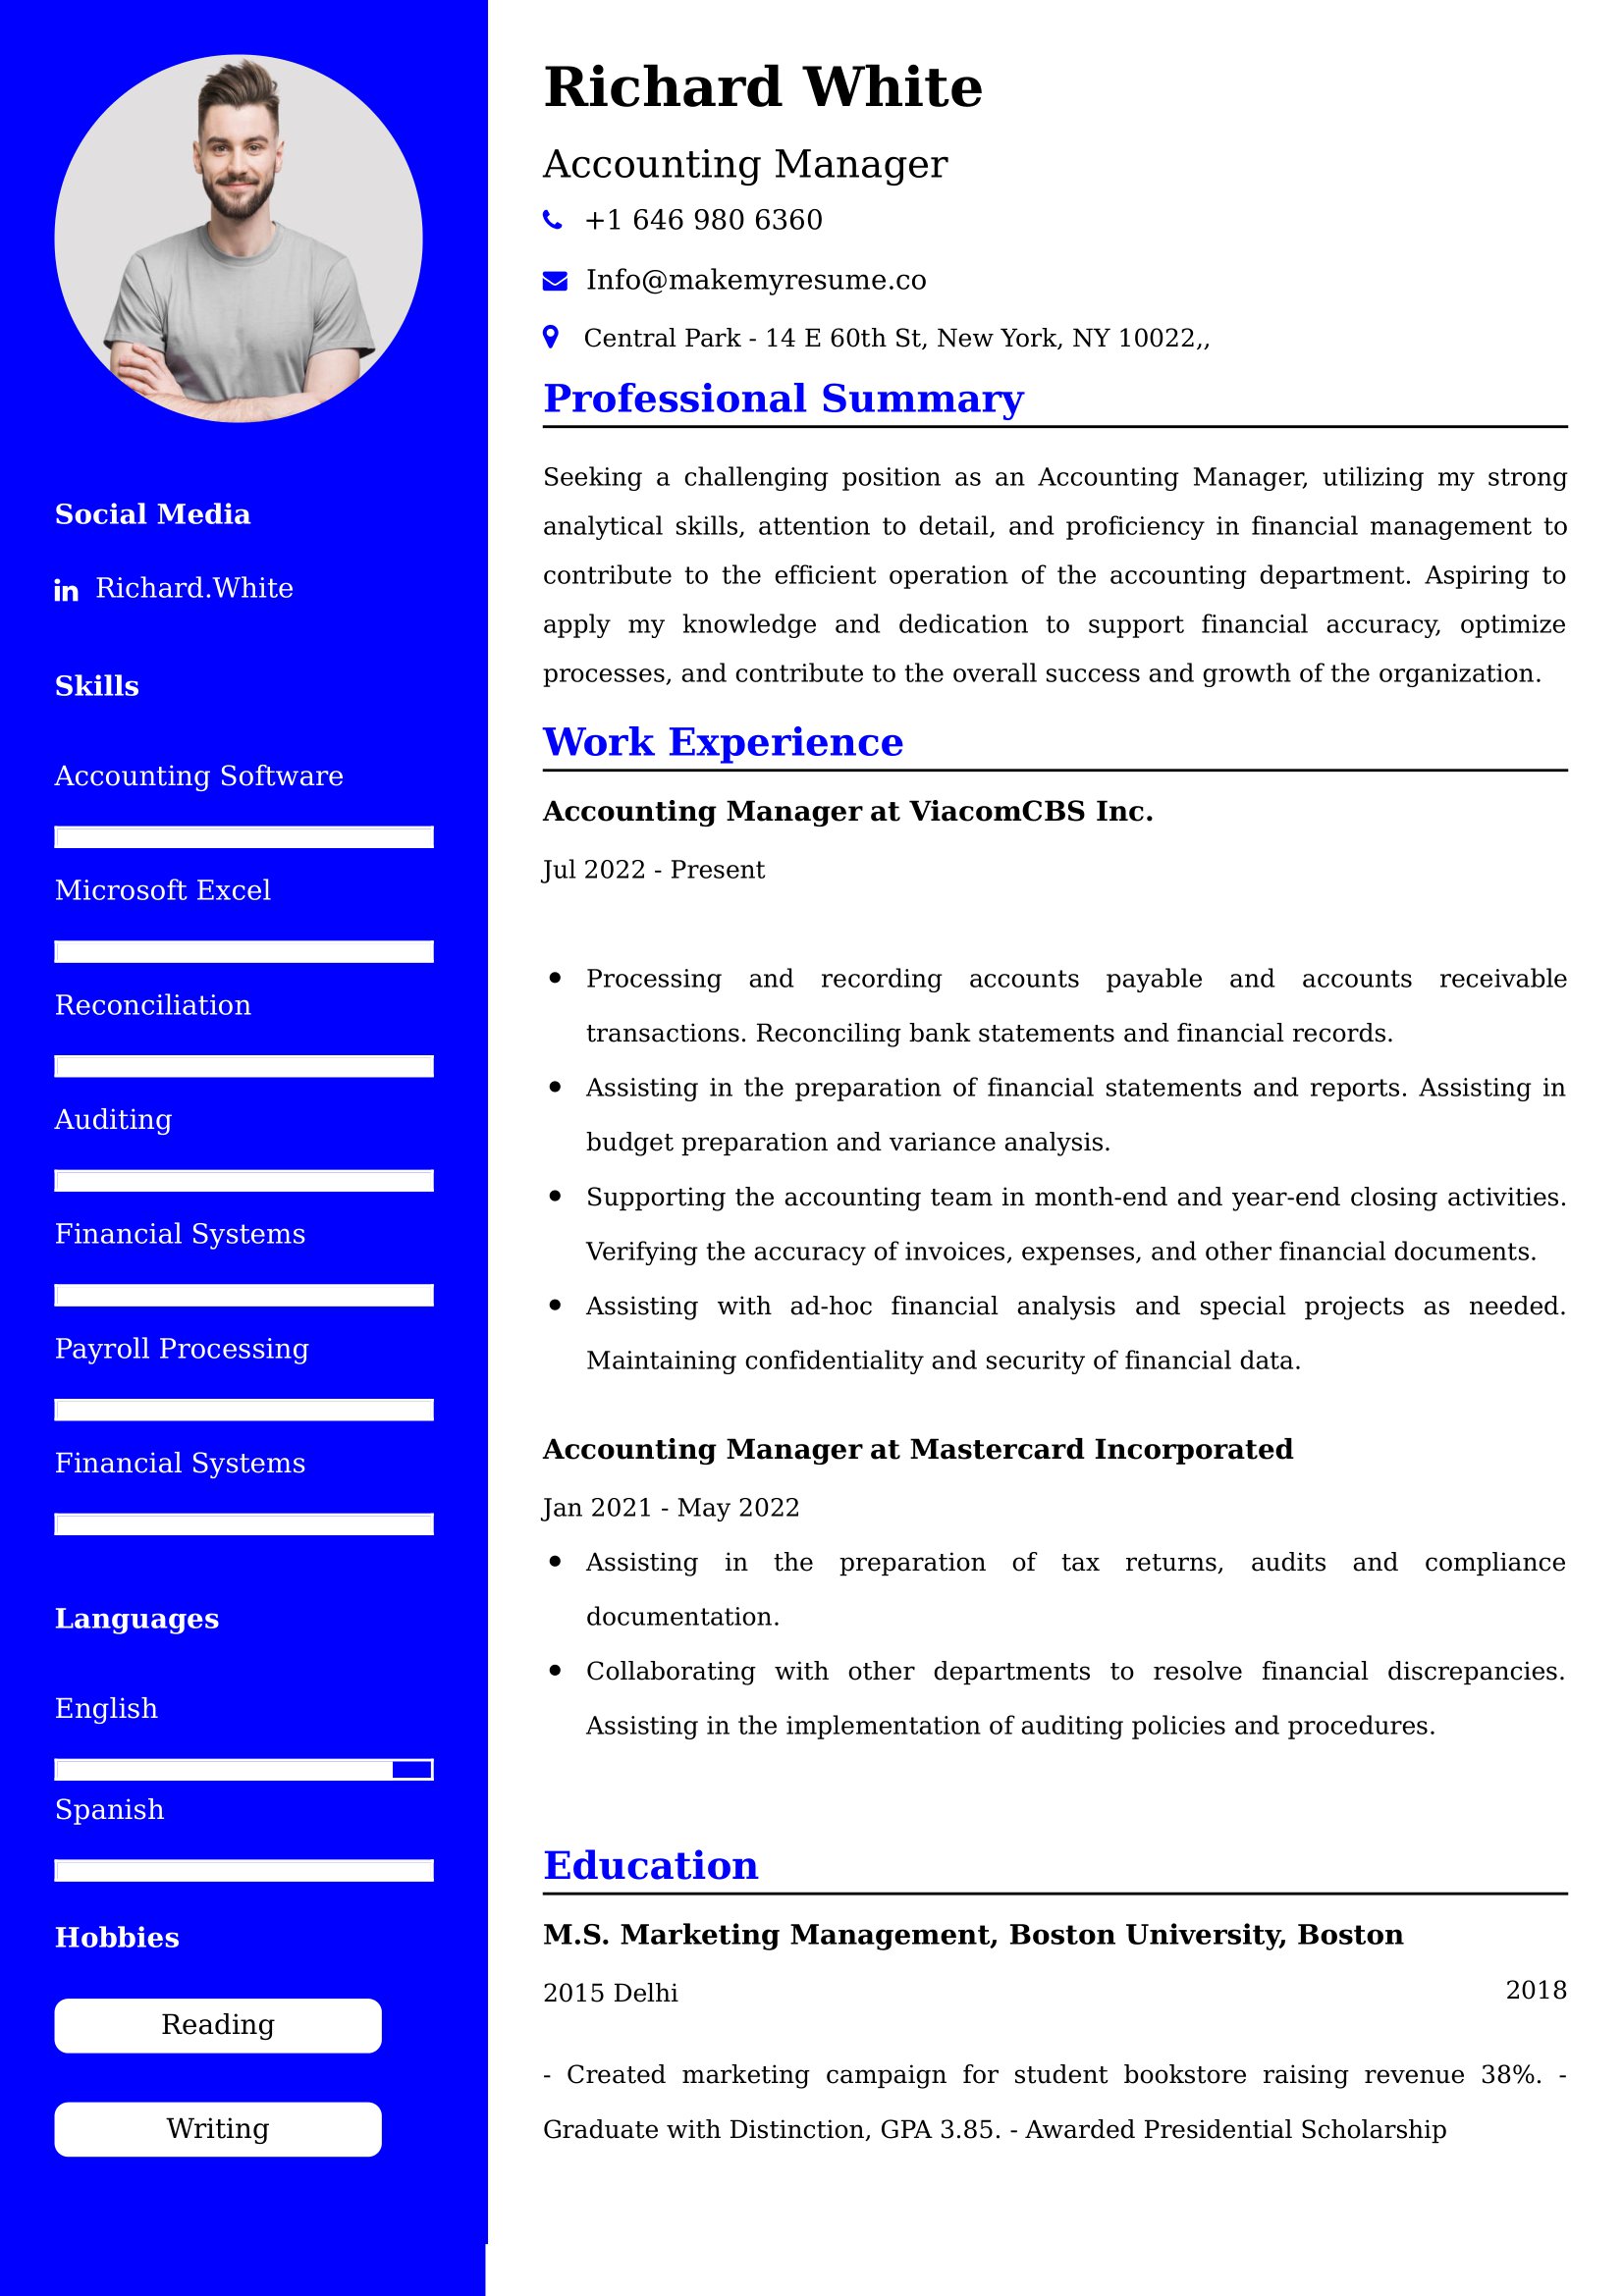 Accounting Manager Resume Examples for UK Jobs - Tips and Guide